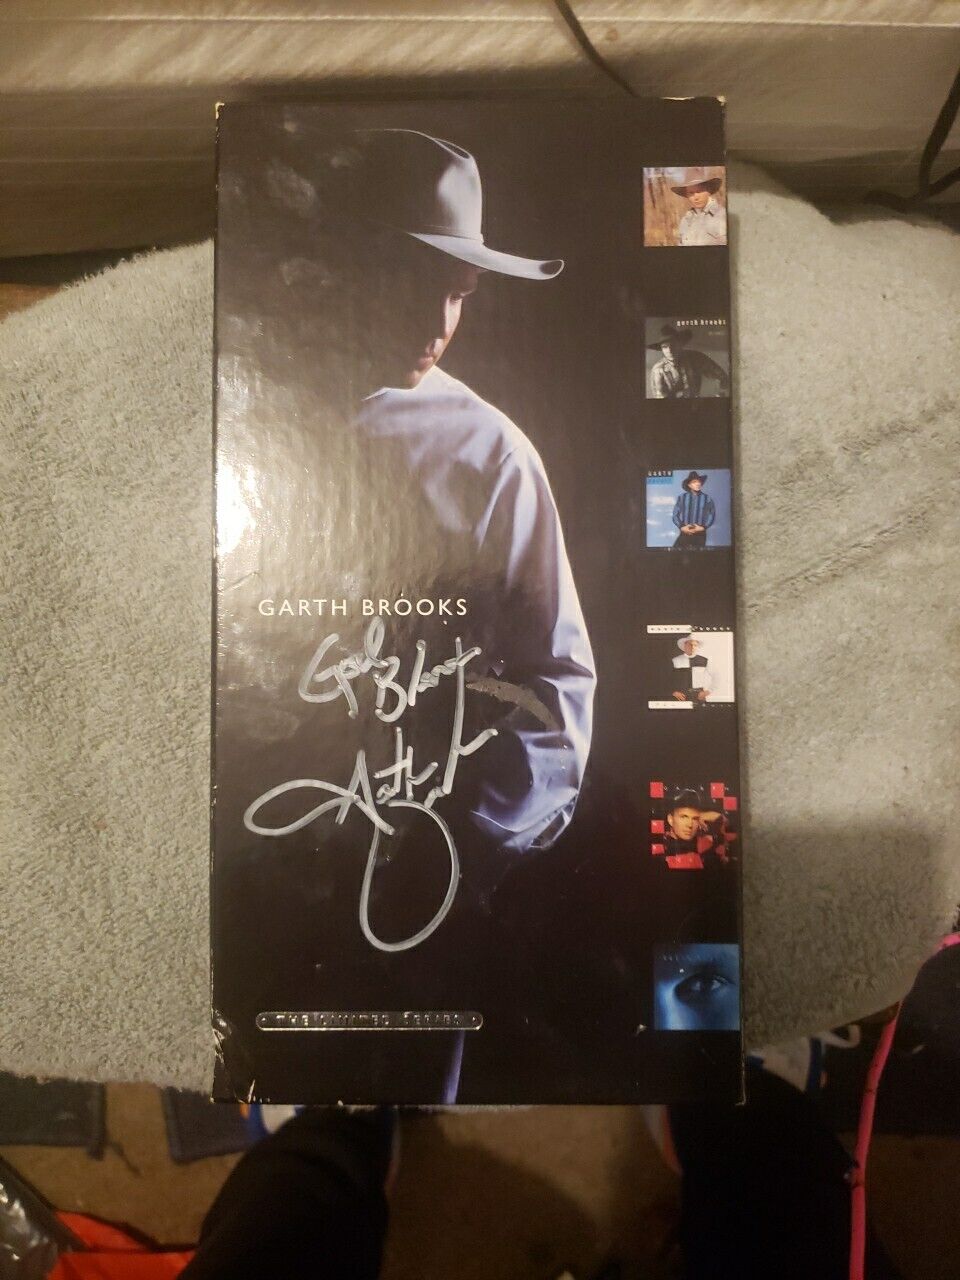 Garth Brooks The Limited Series 6 CD Box Set Capitol Records New Sealed